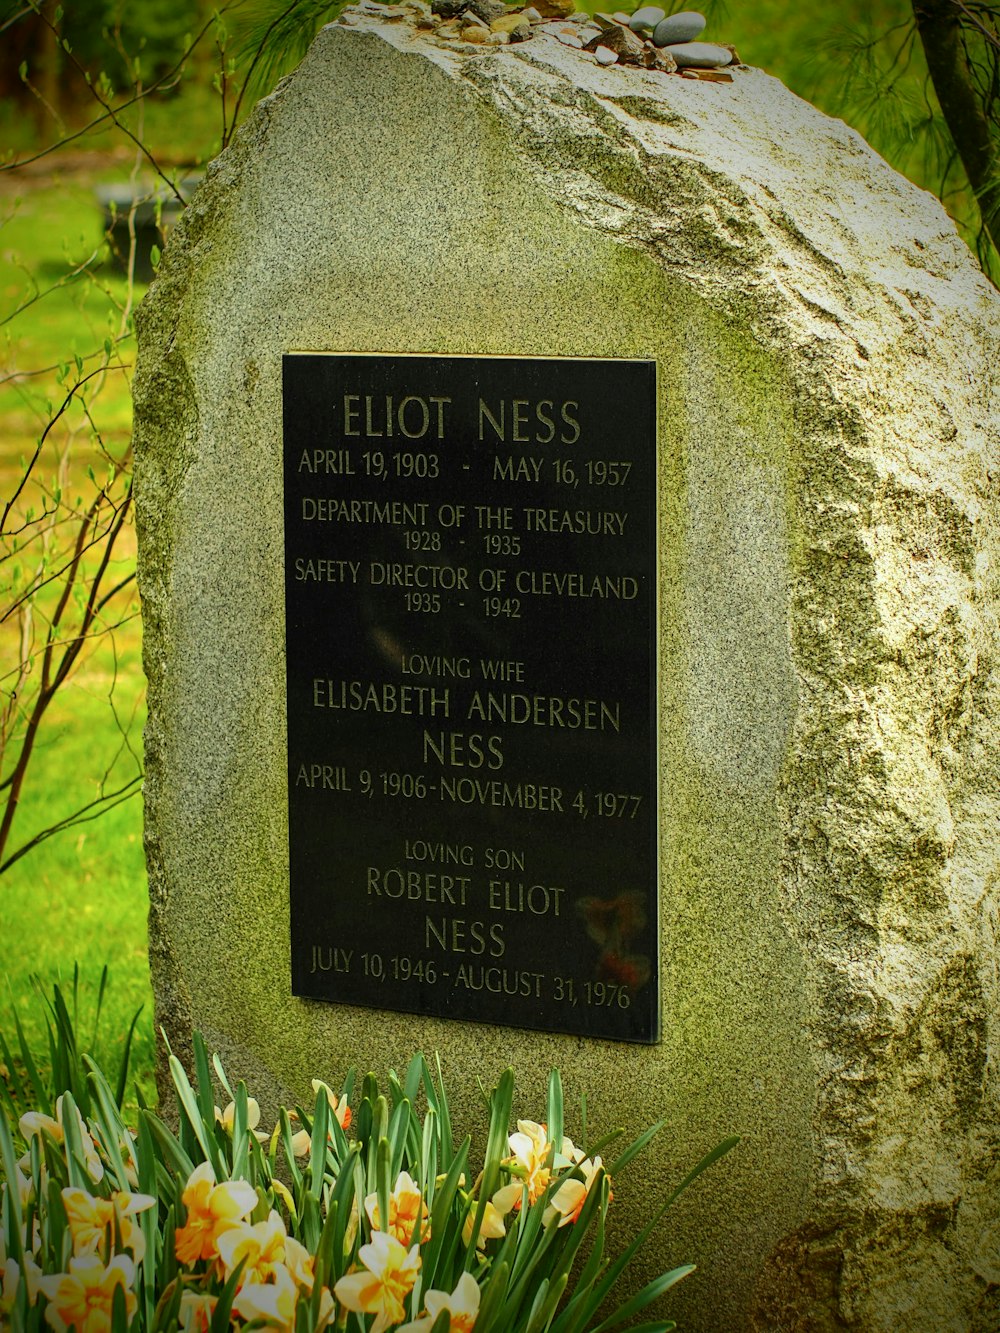 a memorial stone with a plaque on it